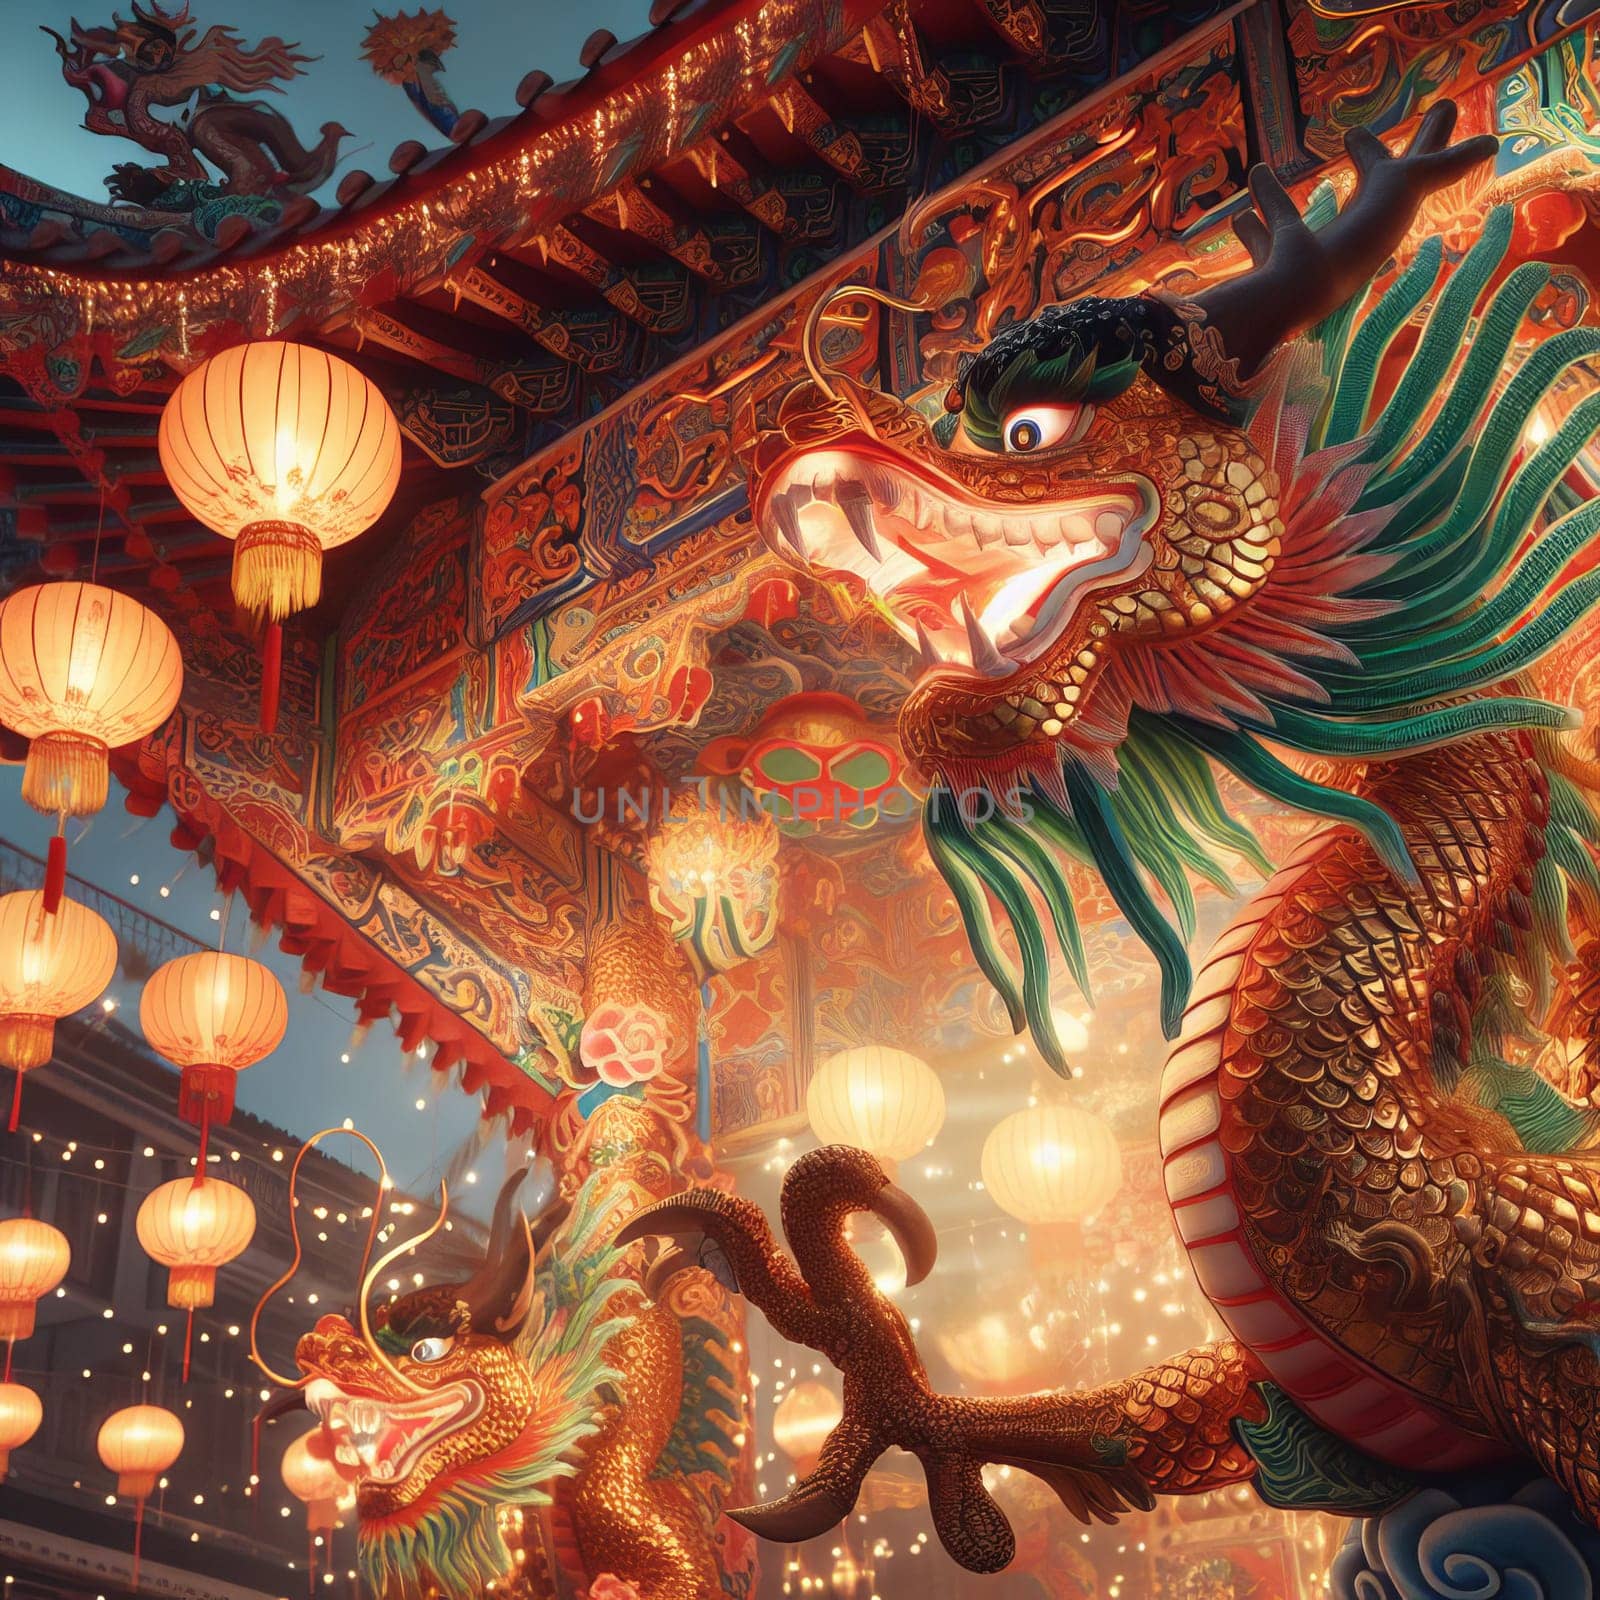 Dragon statue on a temple roof with red lanterns hanging from it. The dragon is green and red with a blue mane and is holding a golden ball in its mouth